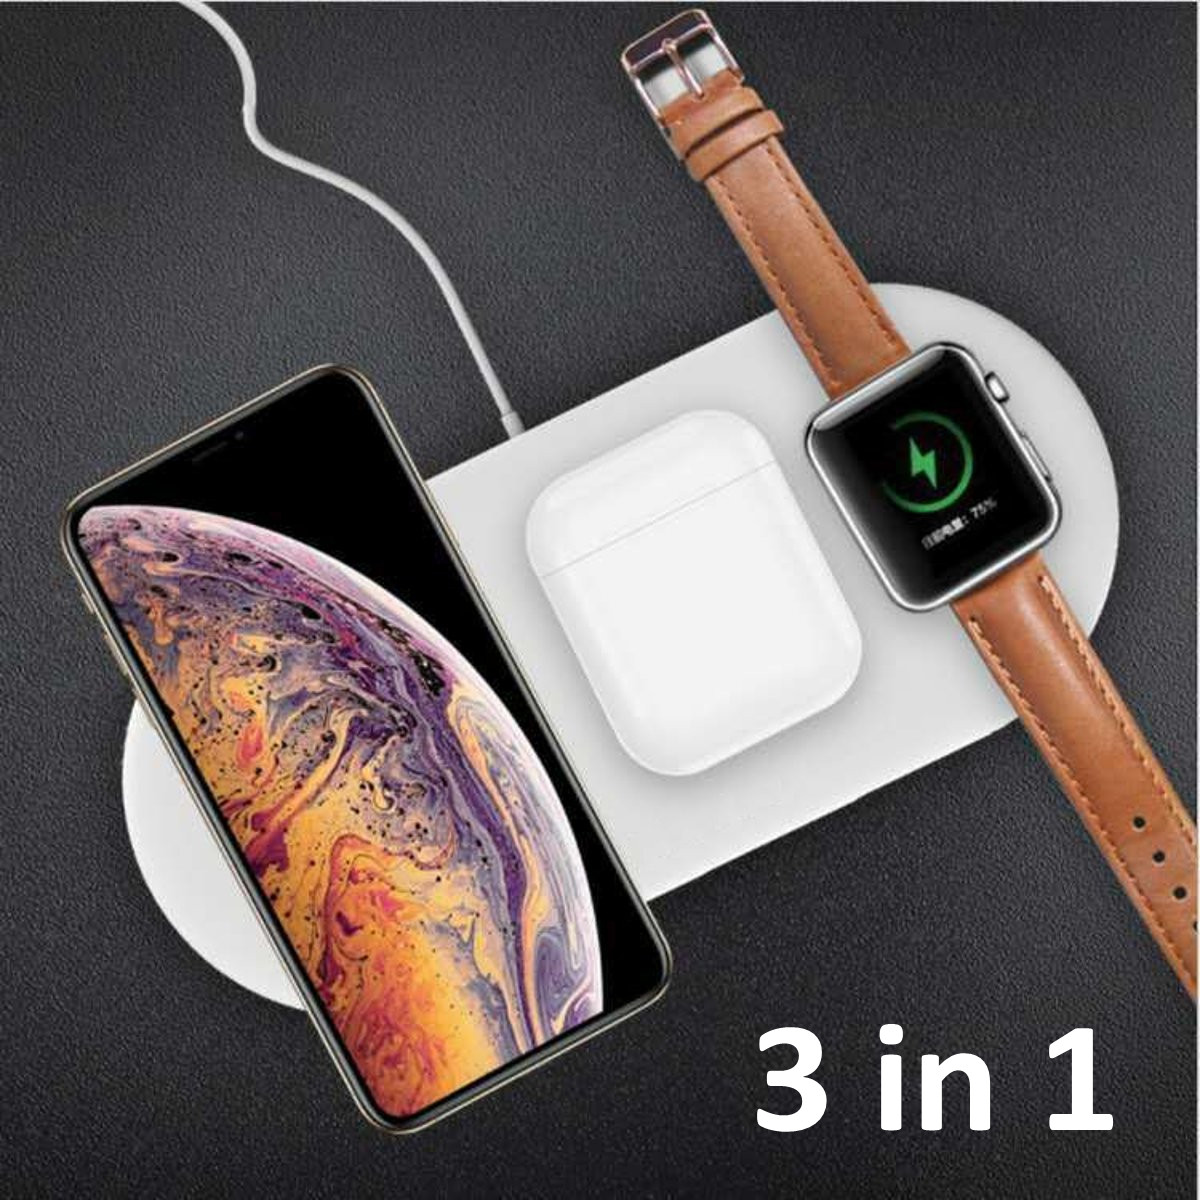 3-in-1-Qi-Wireless-Charger-Fast-Charging-Phone-Chager-For-Smart-Phone-Apple-Watch-Series-Apple-AirPo-1634158-1